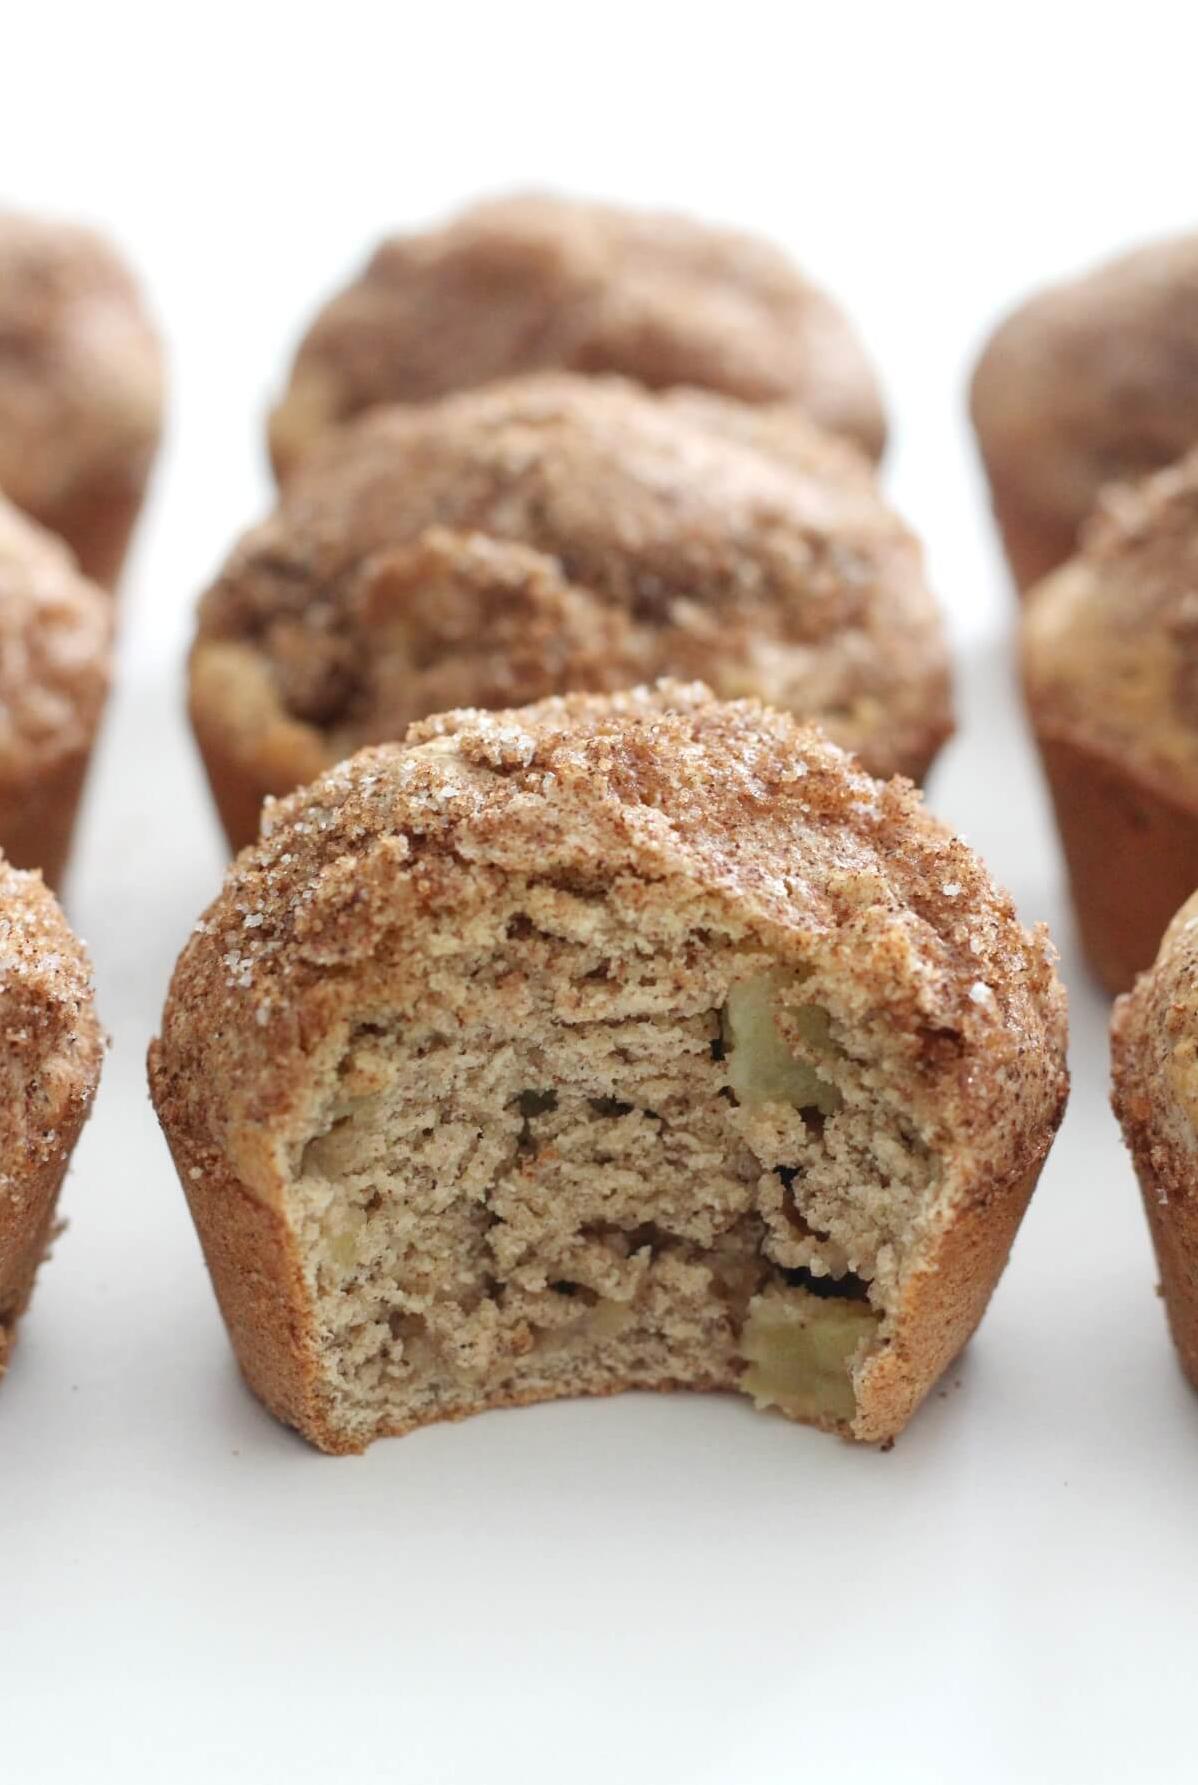  Warm and cozy apple and cinnamon goodness, all wrapped up in a muffin